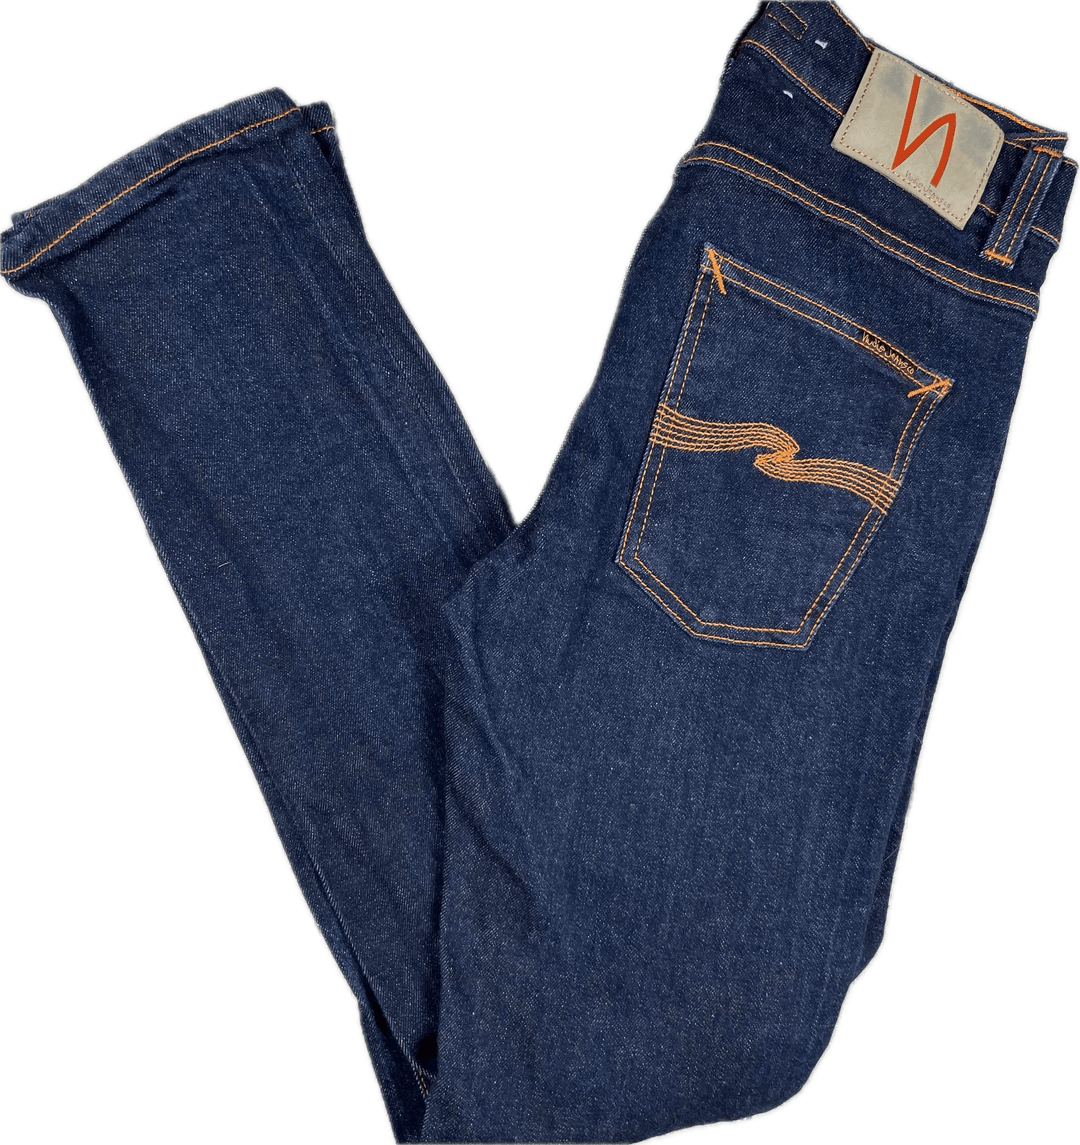 Nudie 'Lean Dean' Dry 16 Drips Wash Organic Cotton Jeans- Size 28/30 - Jean Pool